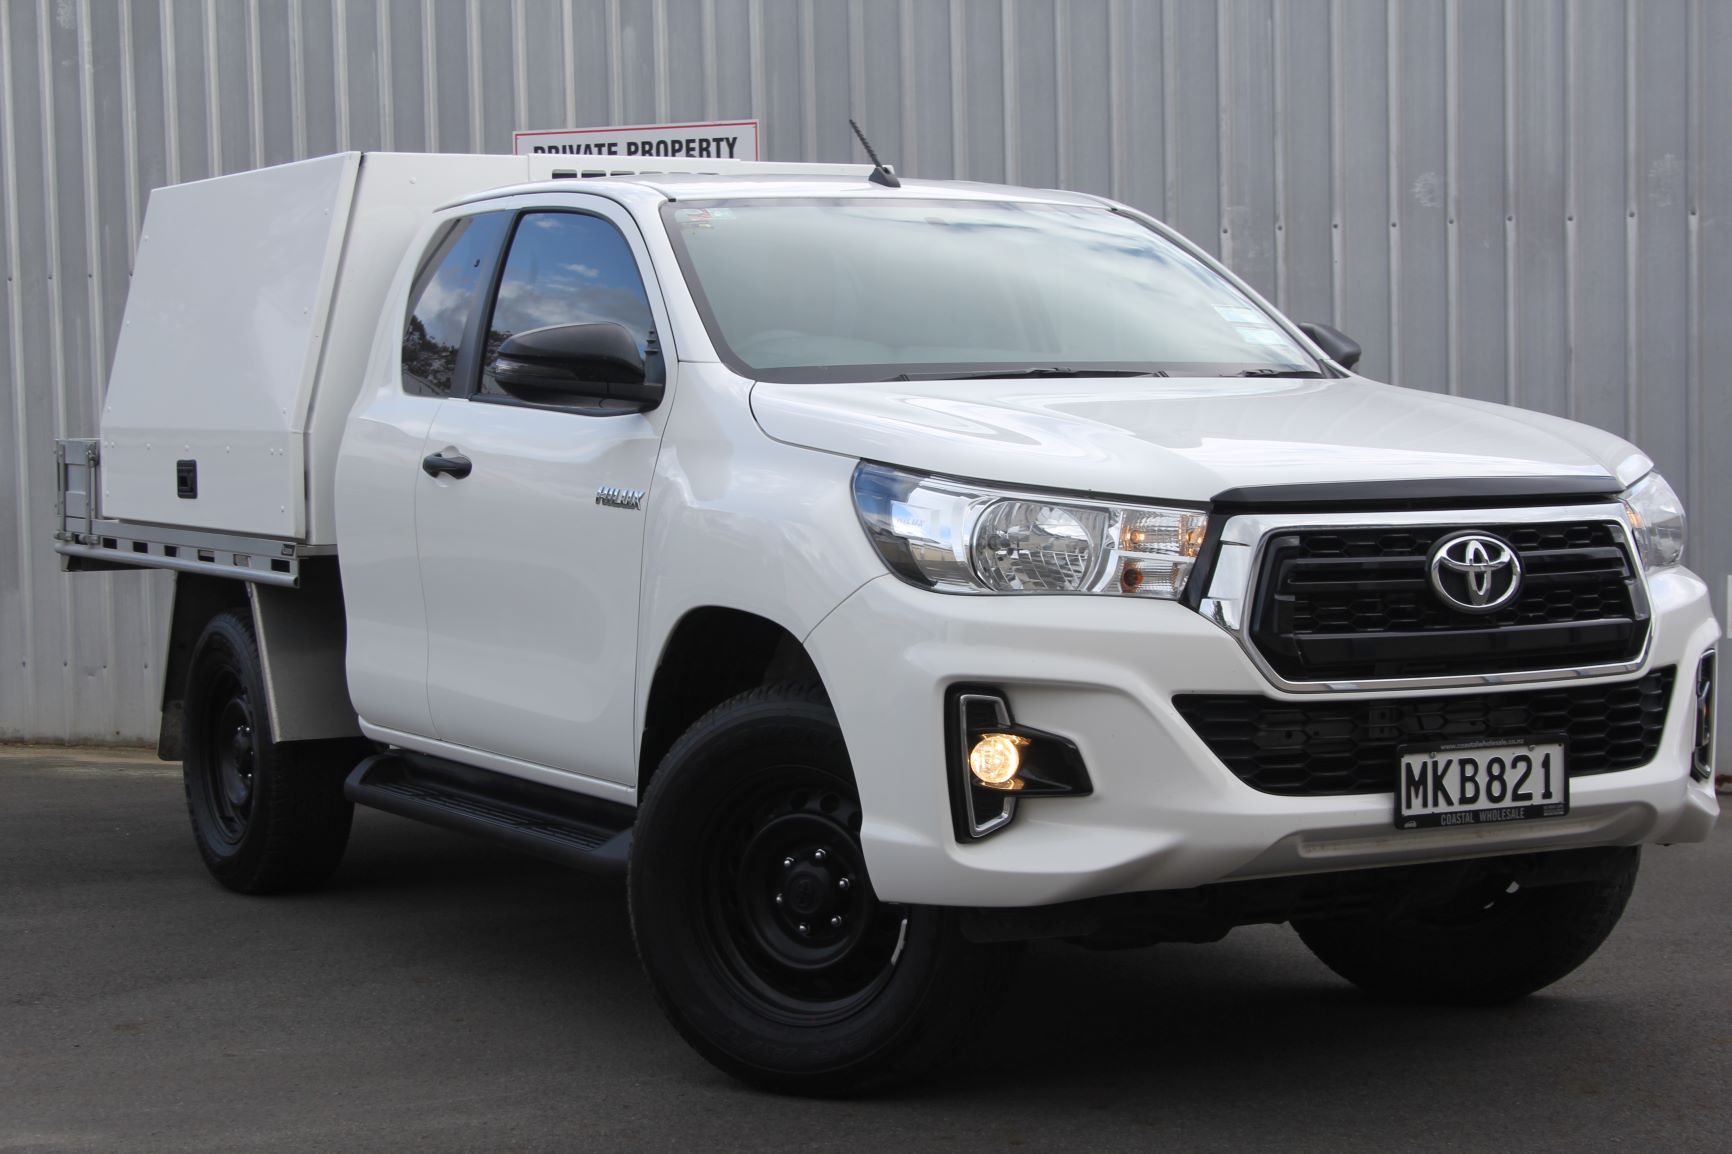 Toyota Hilux 4WD AUTO FLATDECK 2019 for sale in Auckland